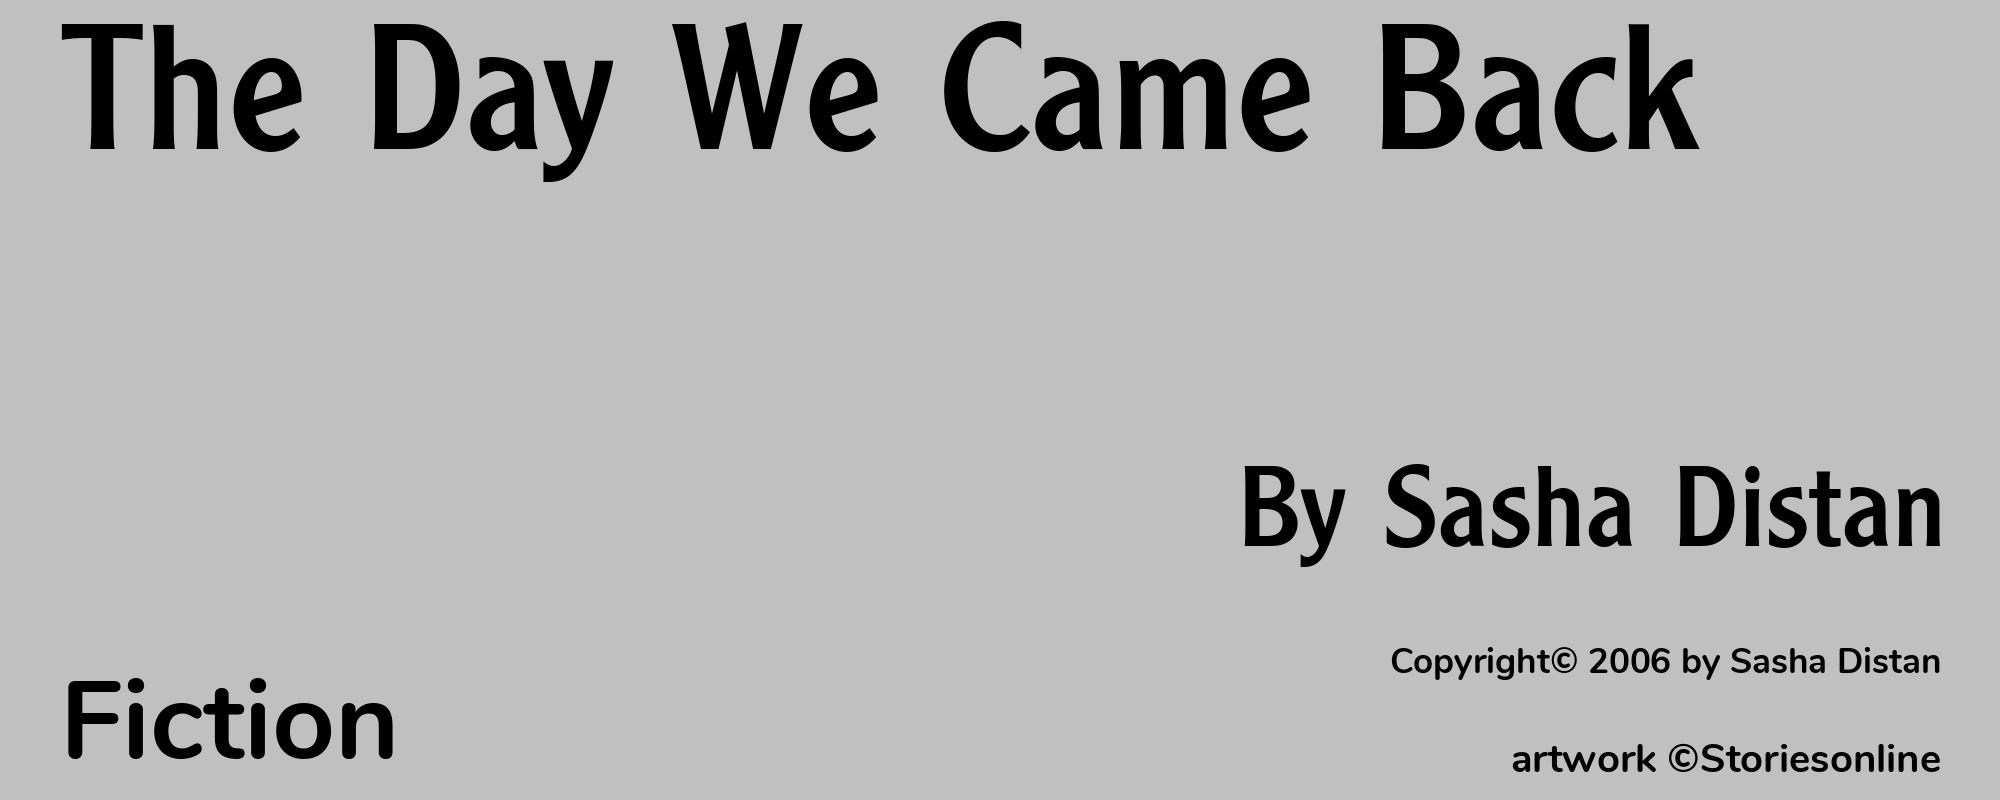 The Day We Came Back - Cover